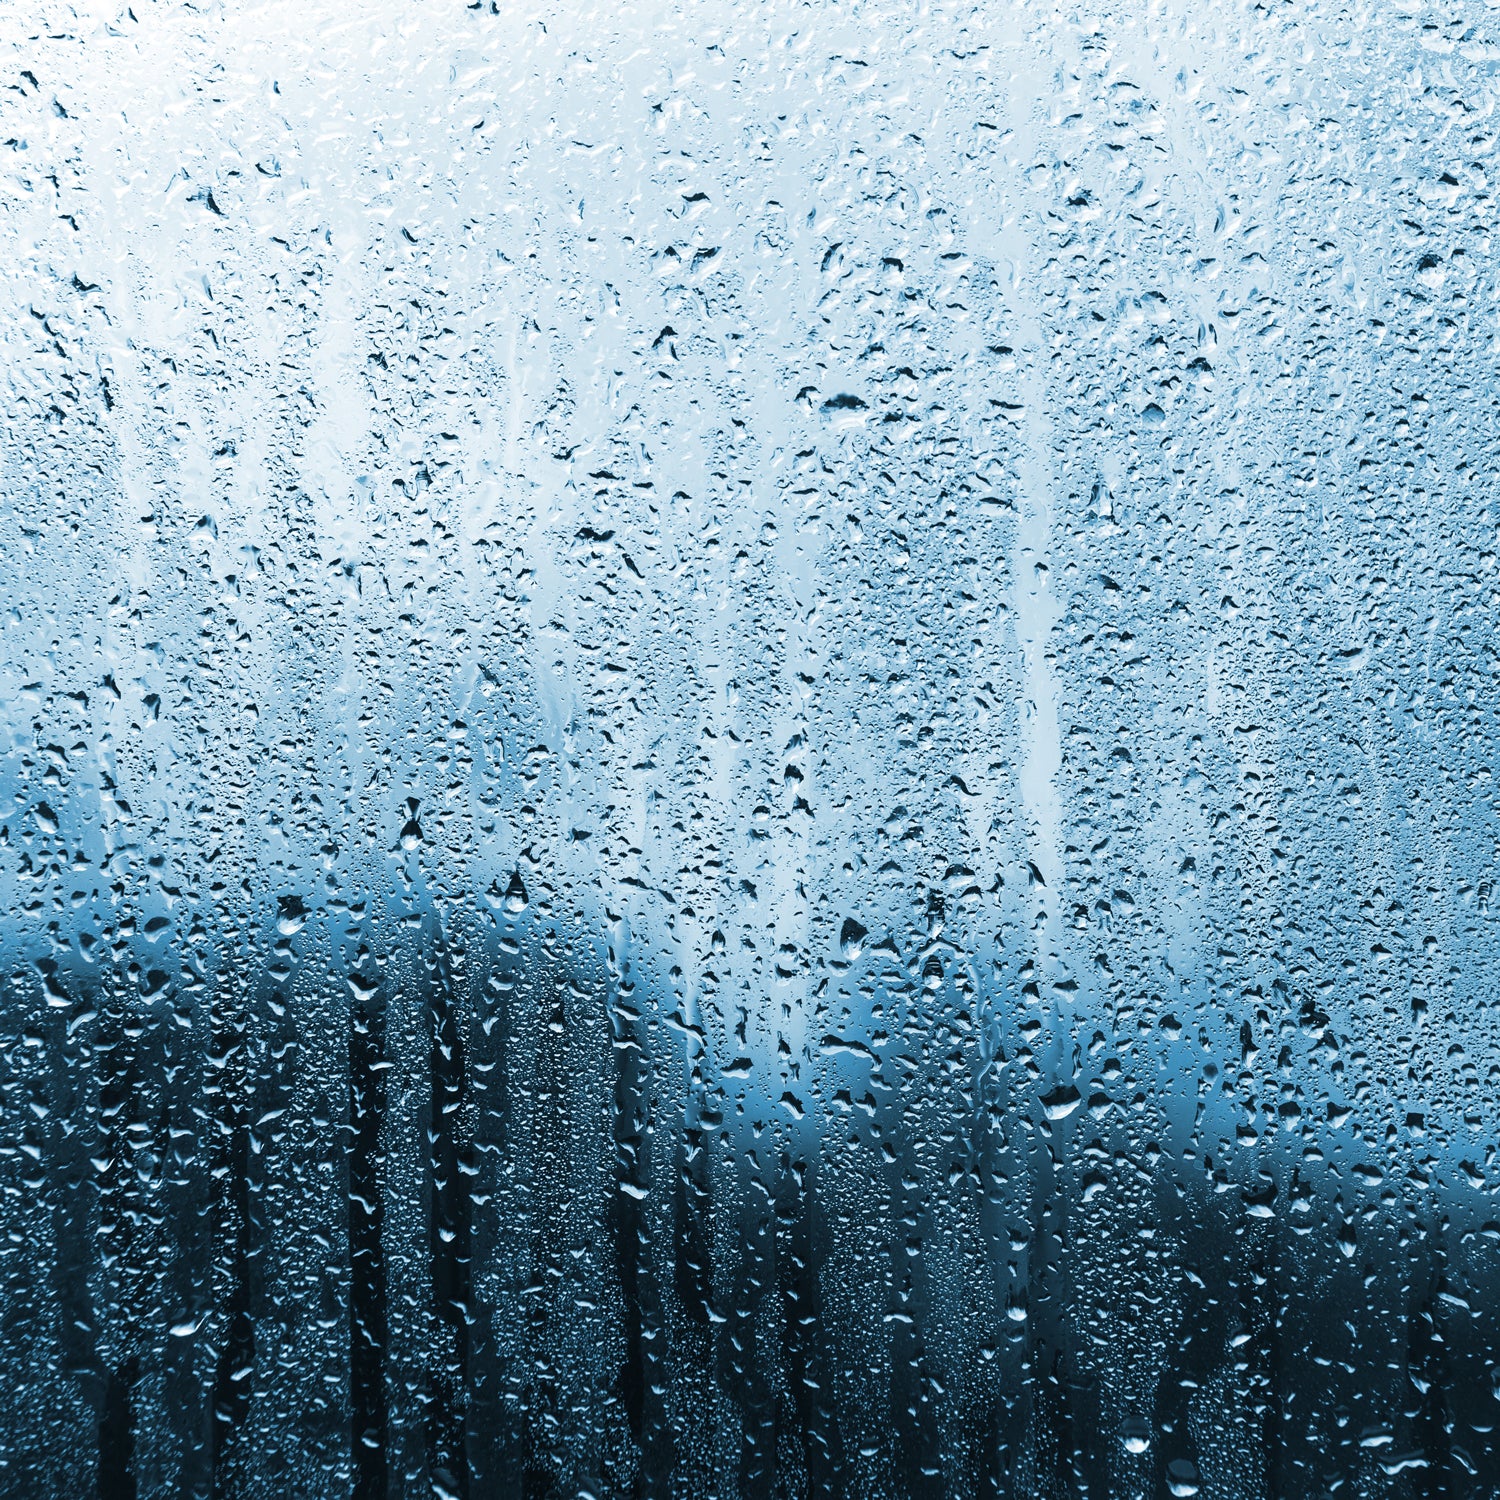 Rainfall on a window, one of the fragrance notes for Eucalyptus Aloe, an odor-controlling candle from Tuscany Candle's Serene Clean® collection of scented candles